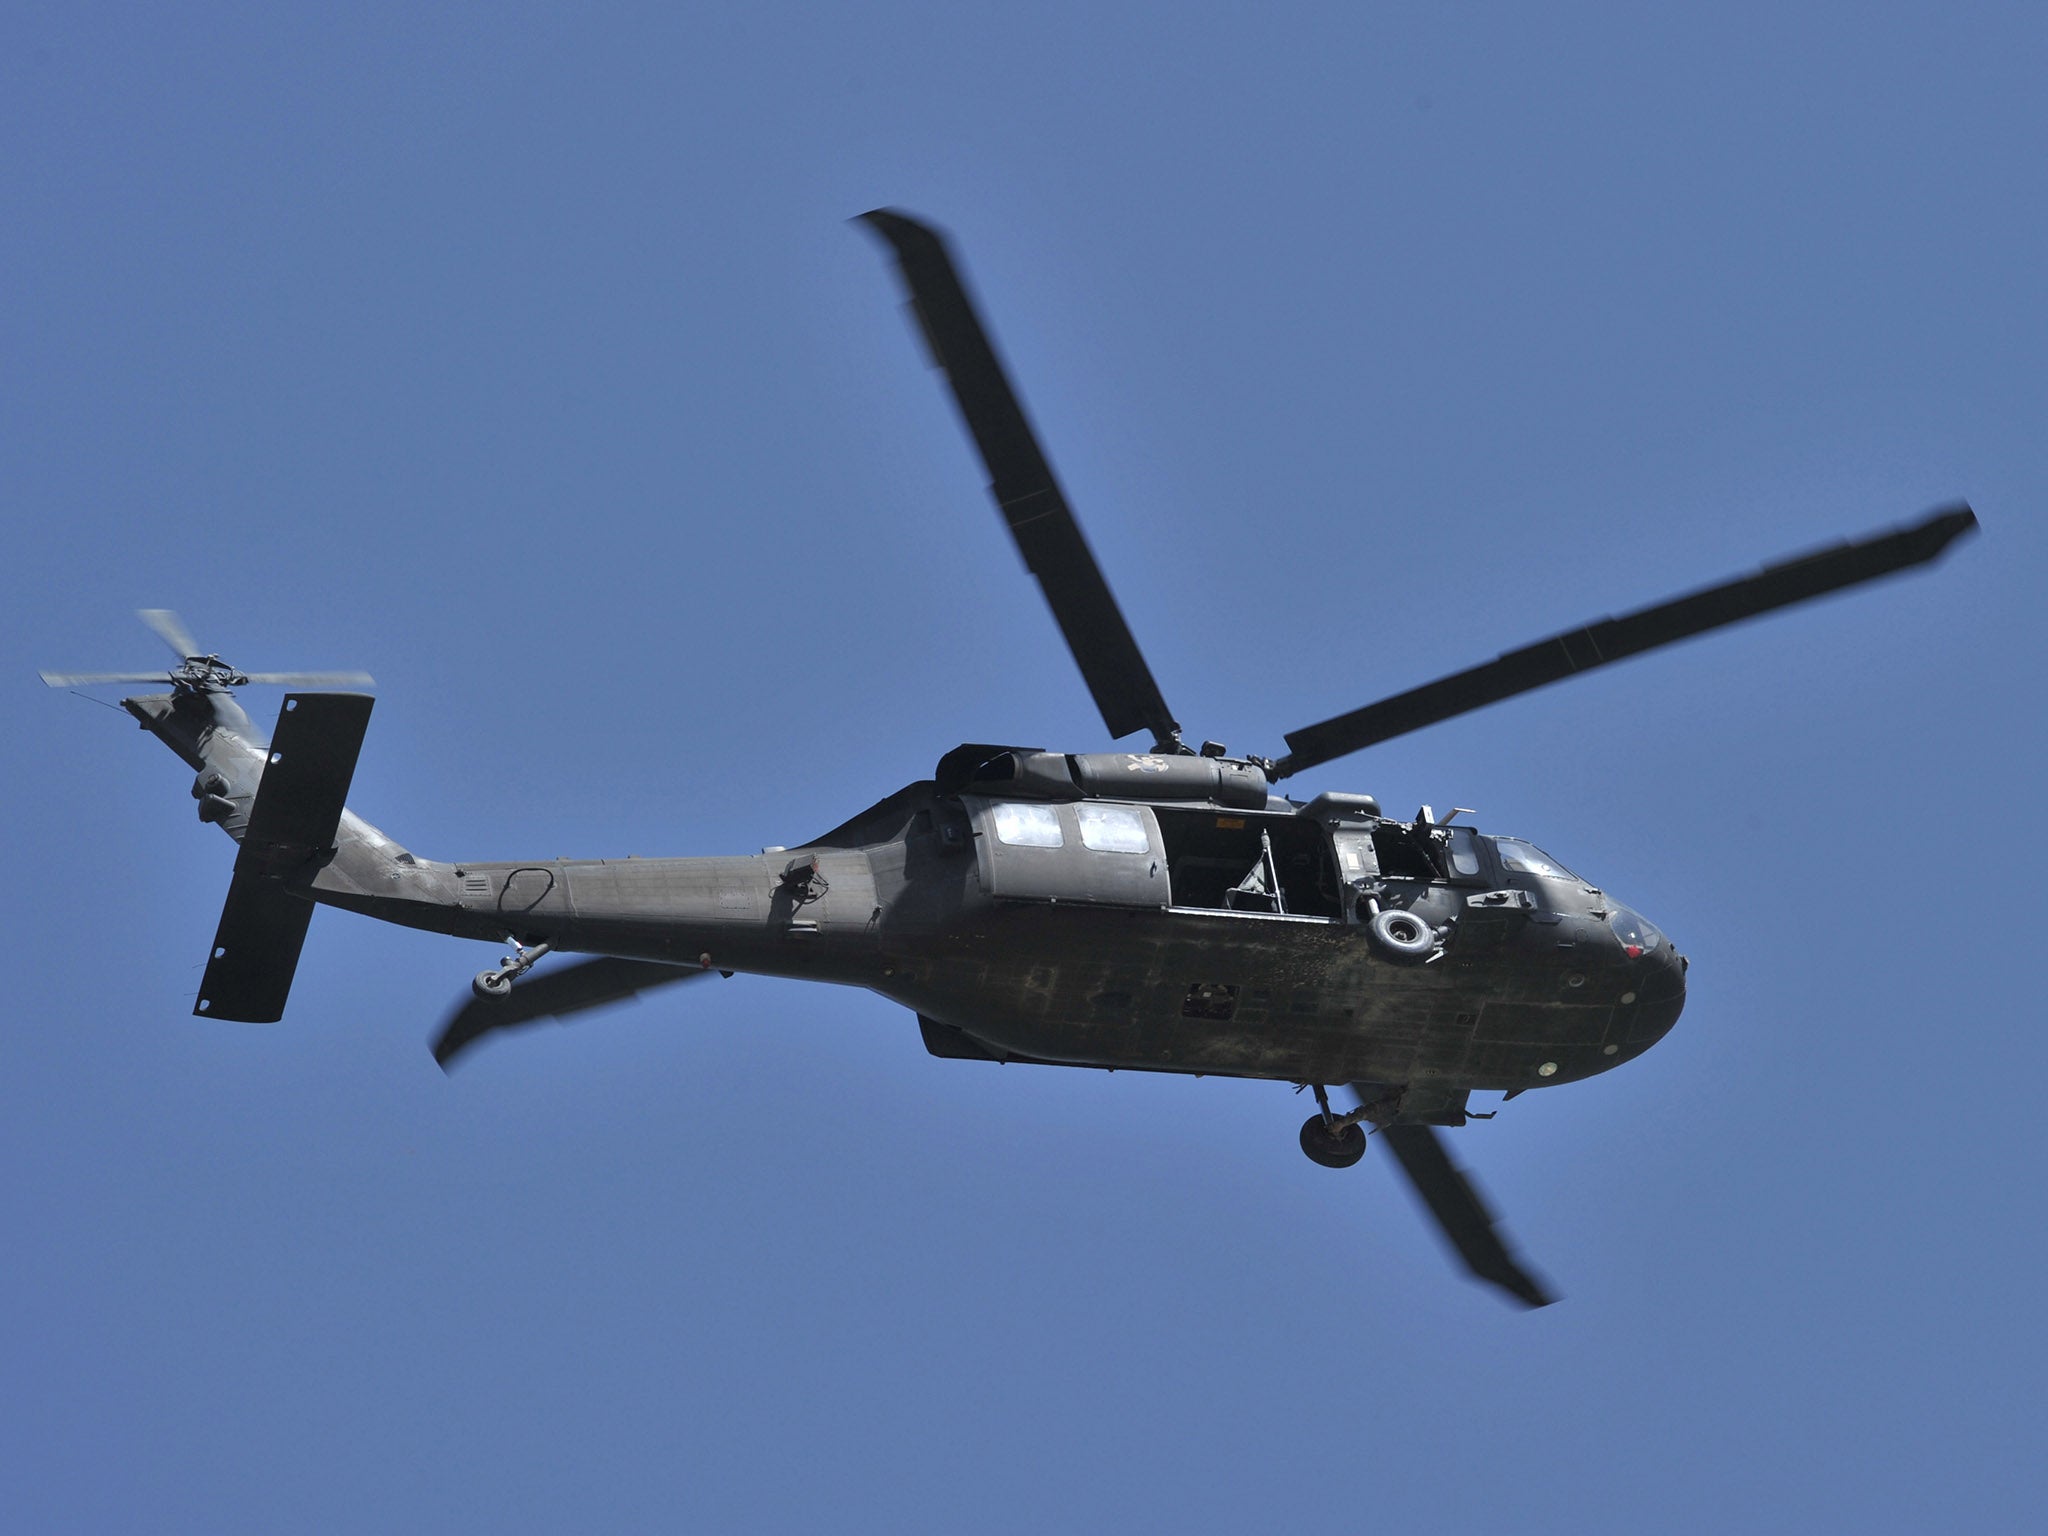 Seven military personnel and one civilian landed in northern Greece in a Blackhawk helicopter